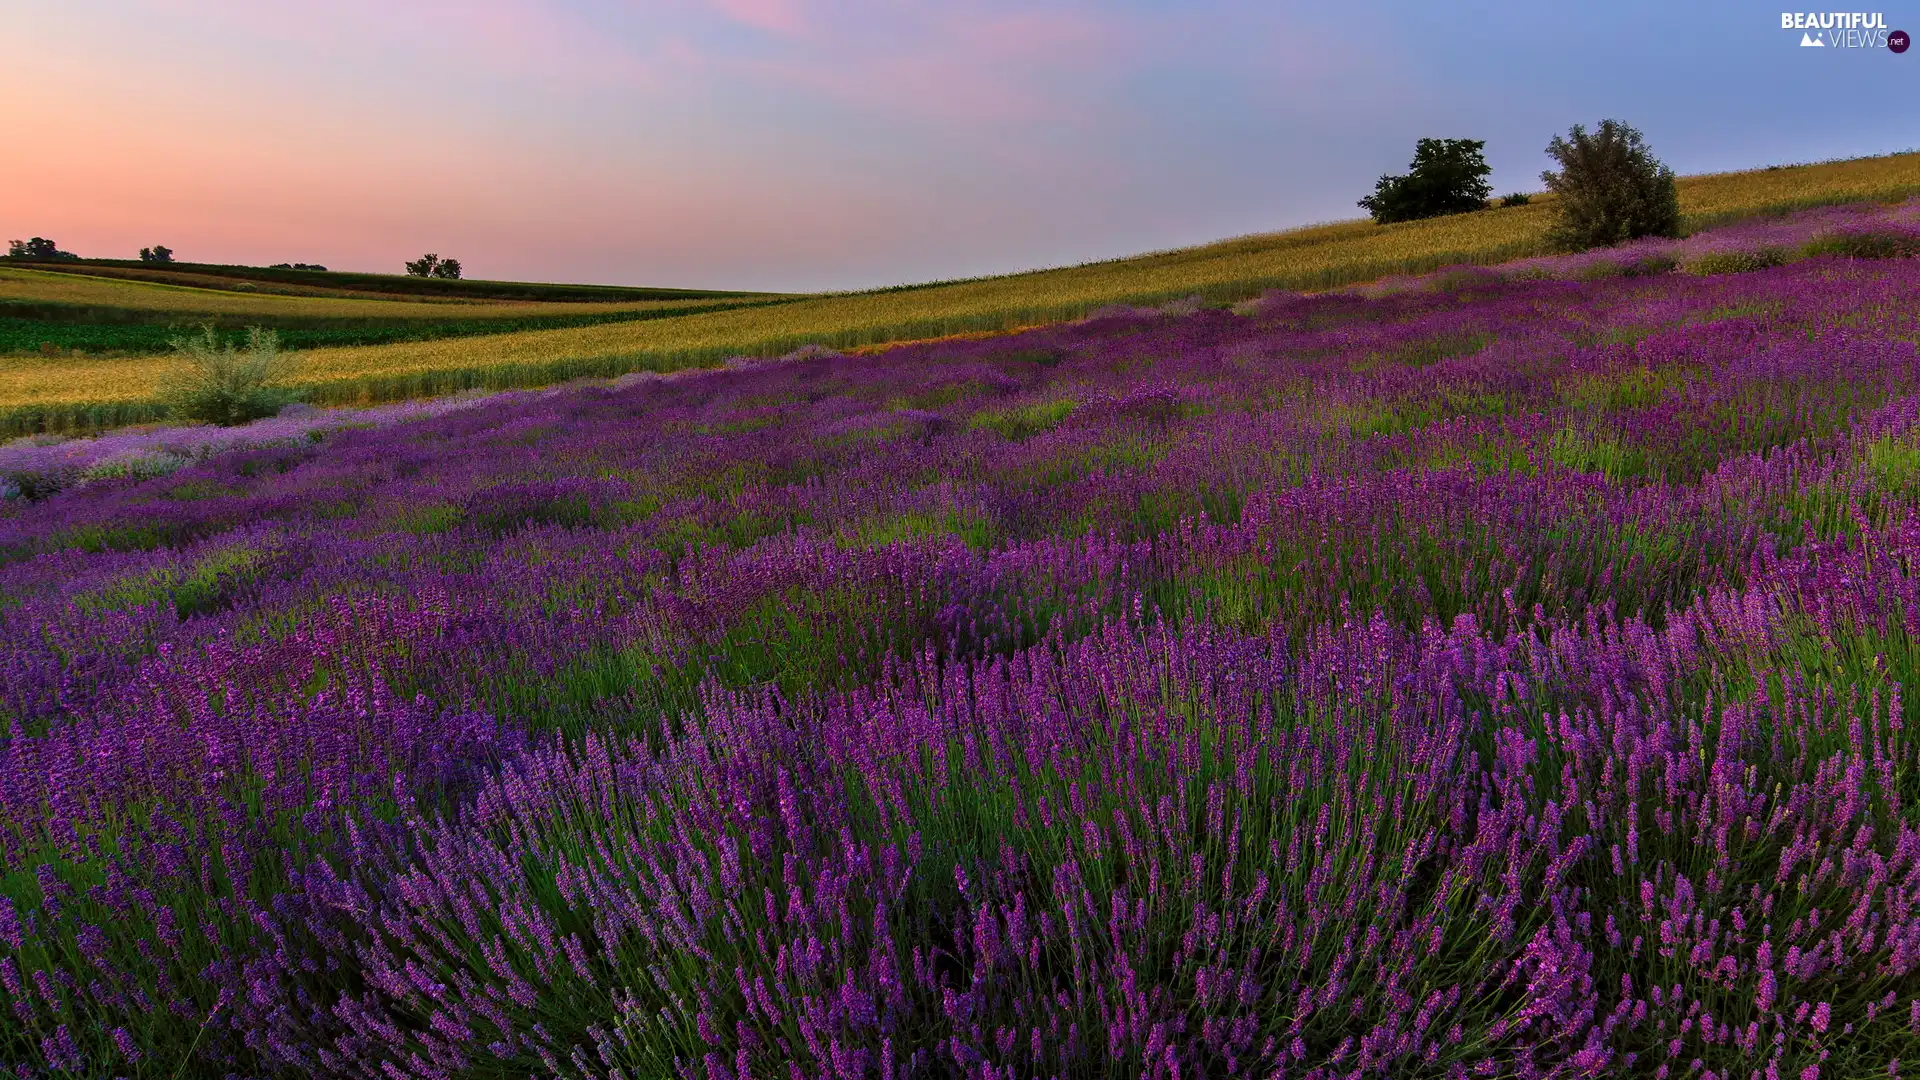 field, trees, viewes, lavender